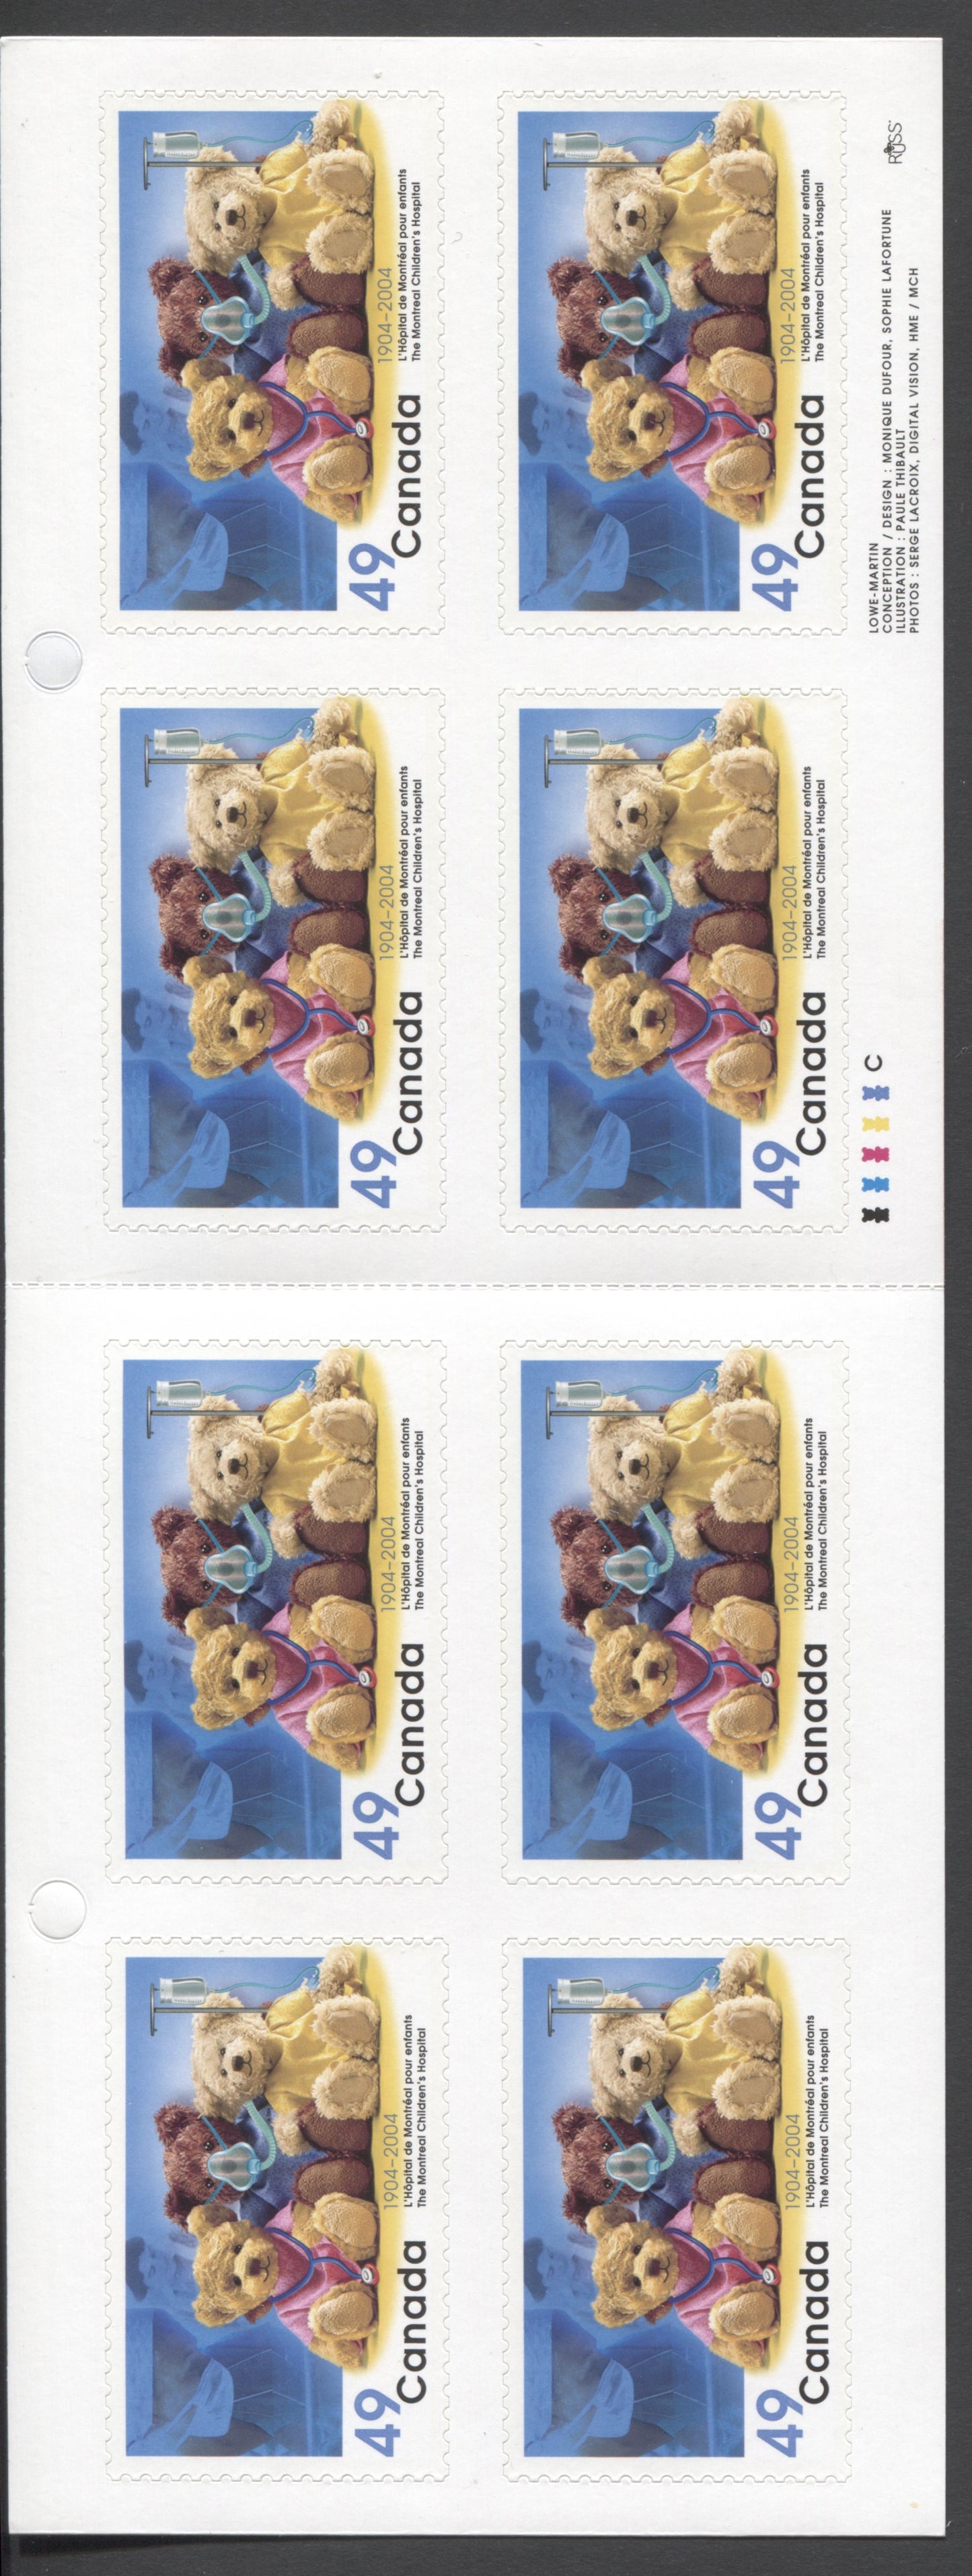 Canada #BK290 2004 Montreal Children's Hospital Issue, Complete $3.92 Booklet, Tullis Russell Coatings Paper, Dead Paper, 4 mm GT-4 Tagging